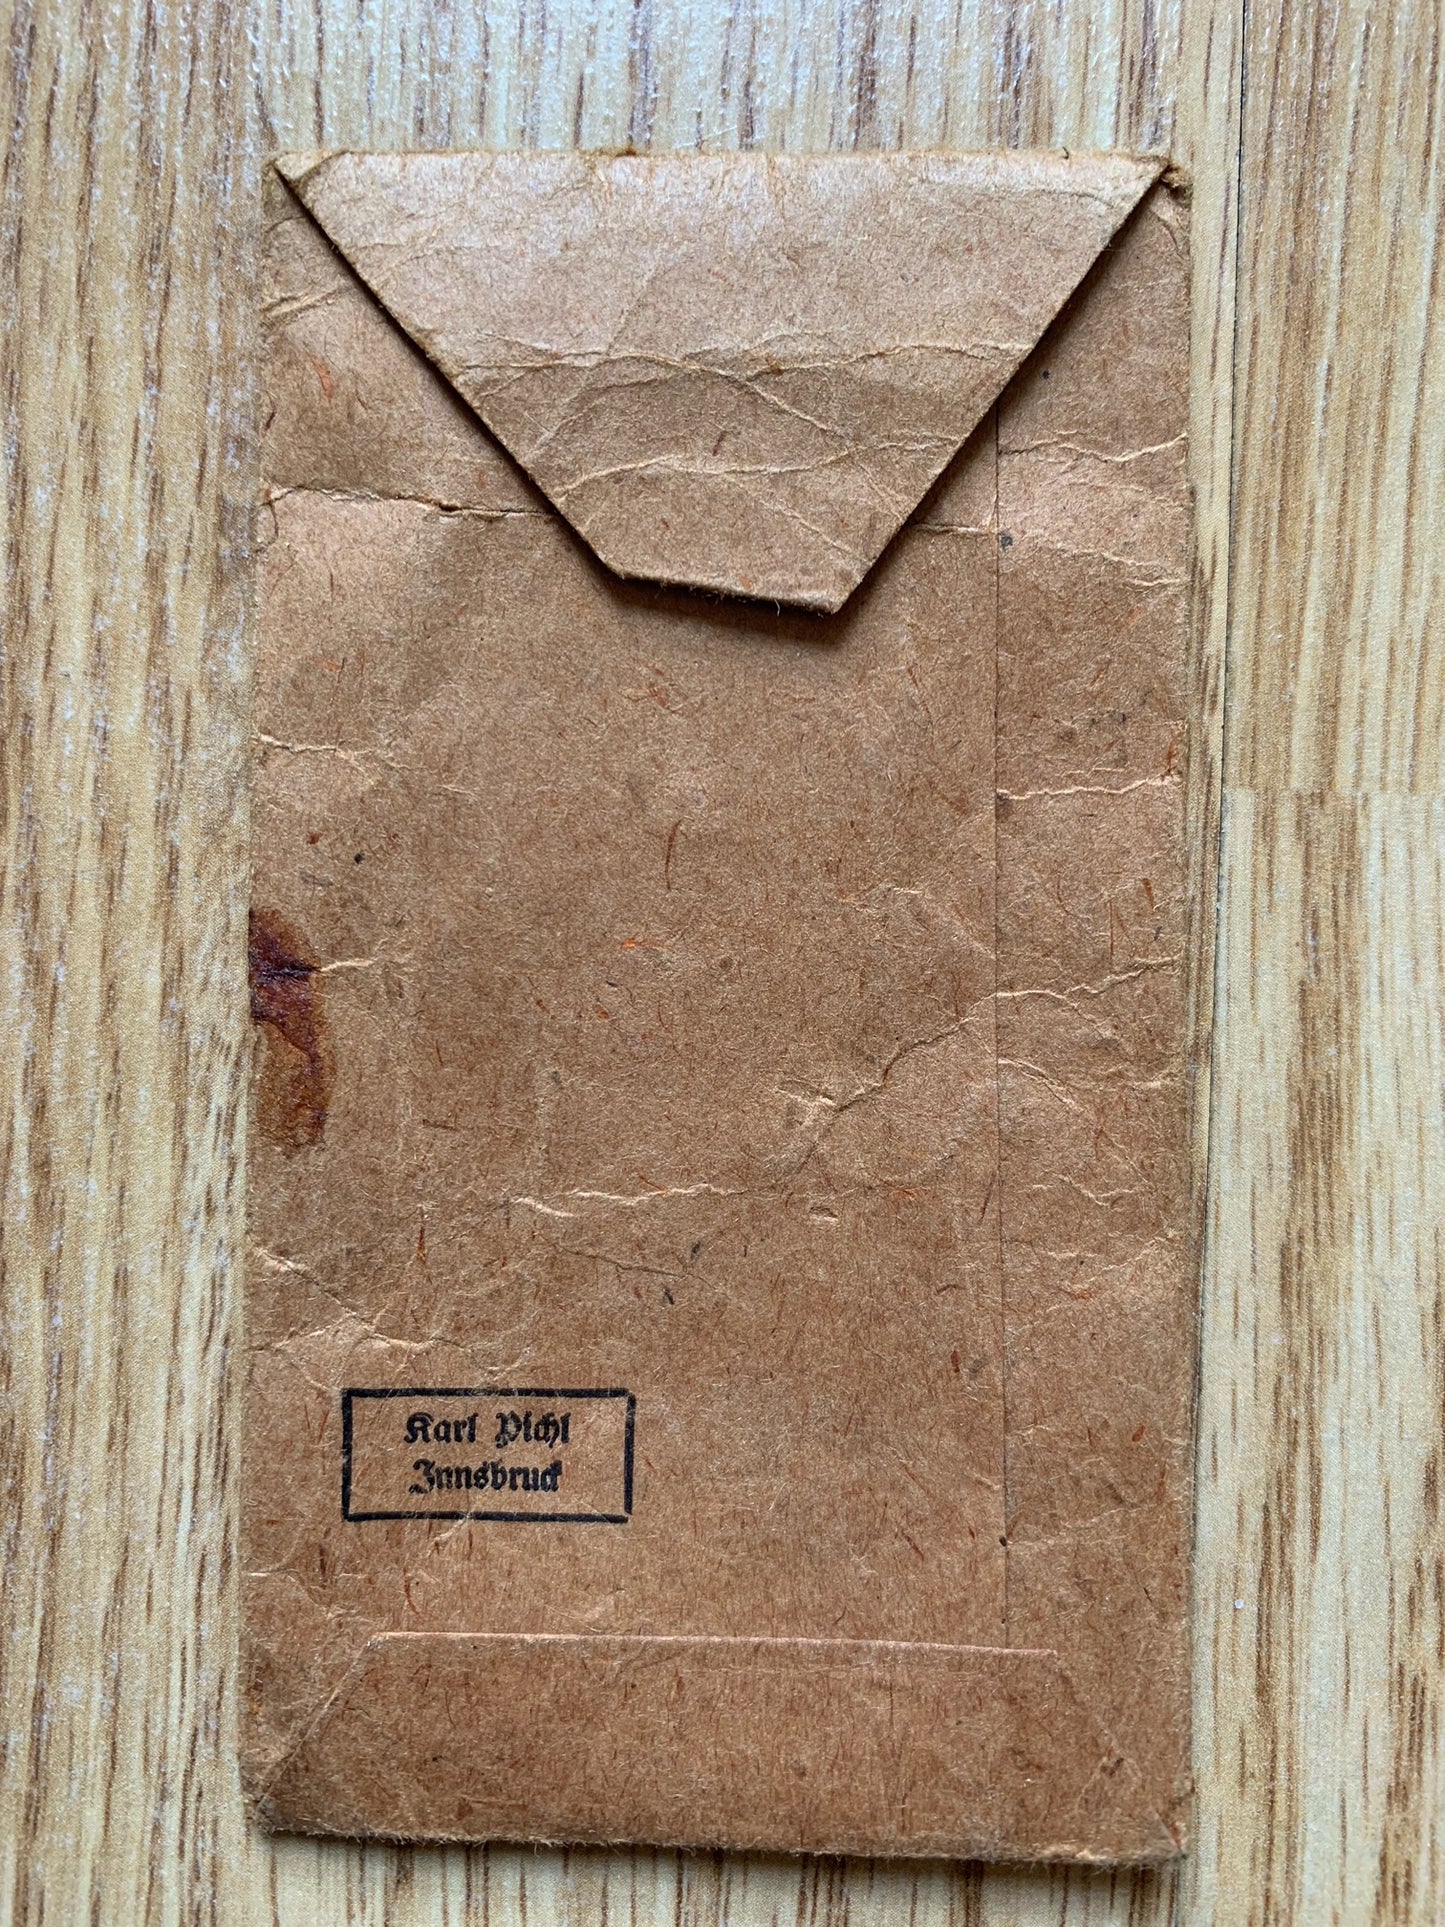 West Wall medal w/ ribbon and envelope